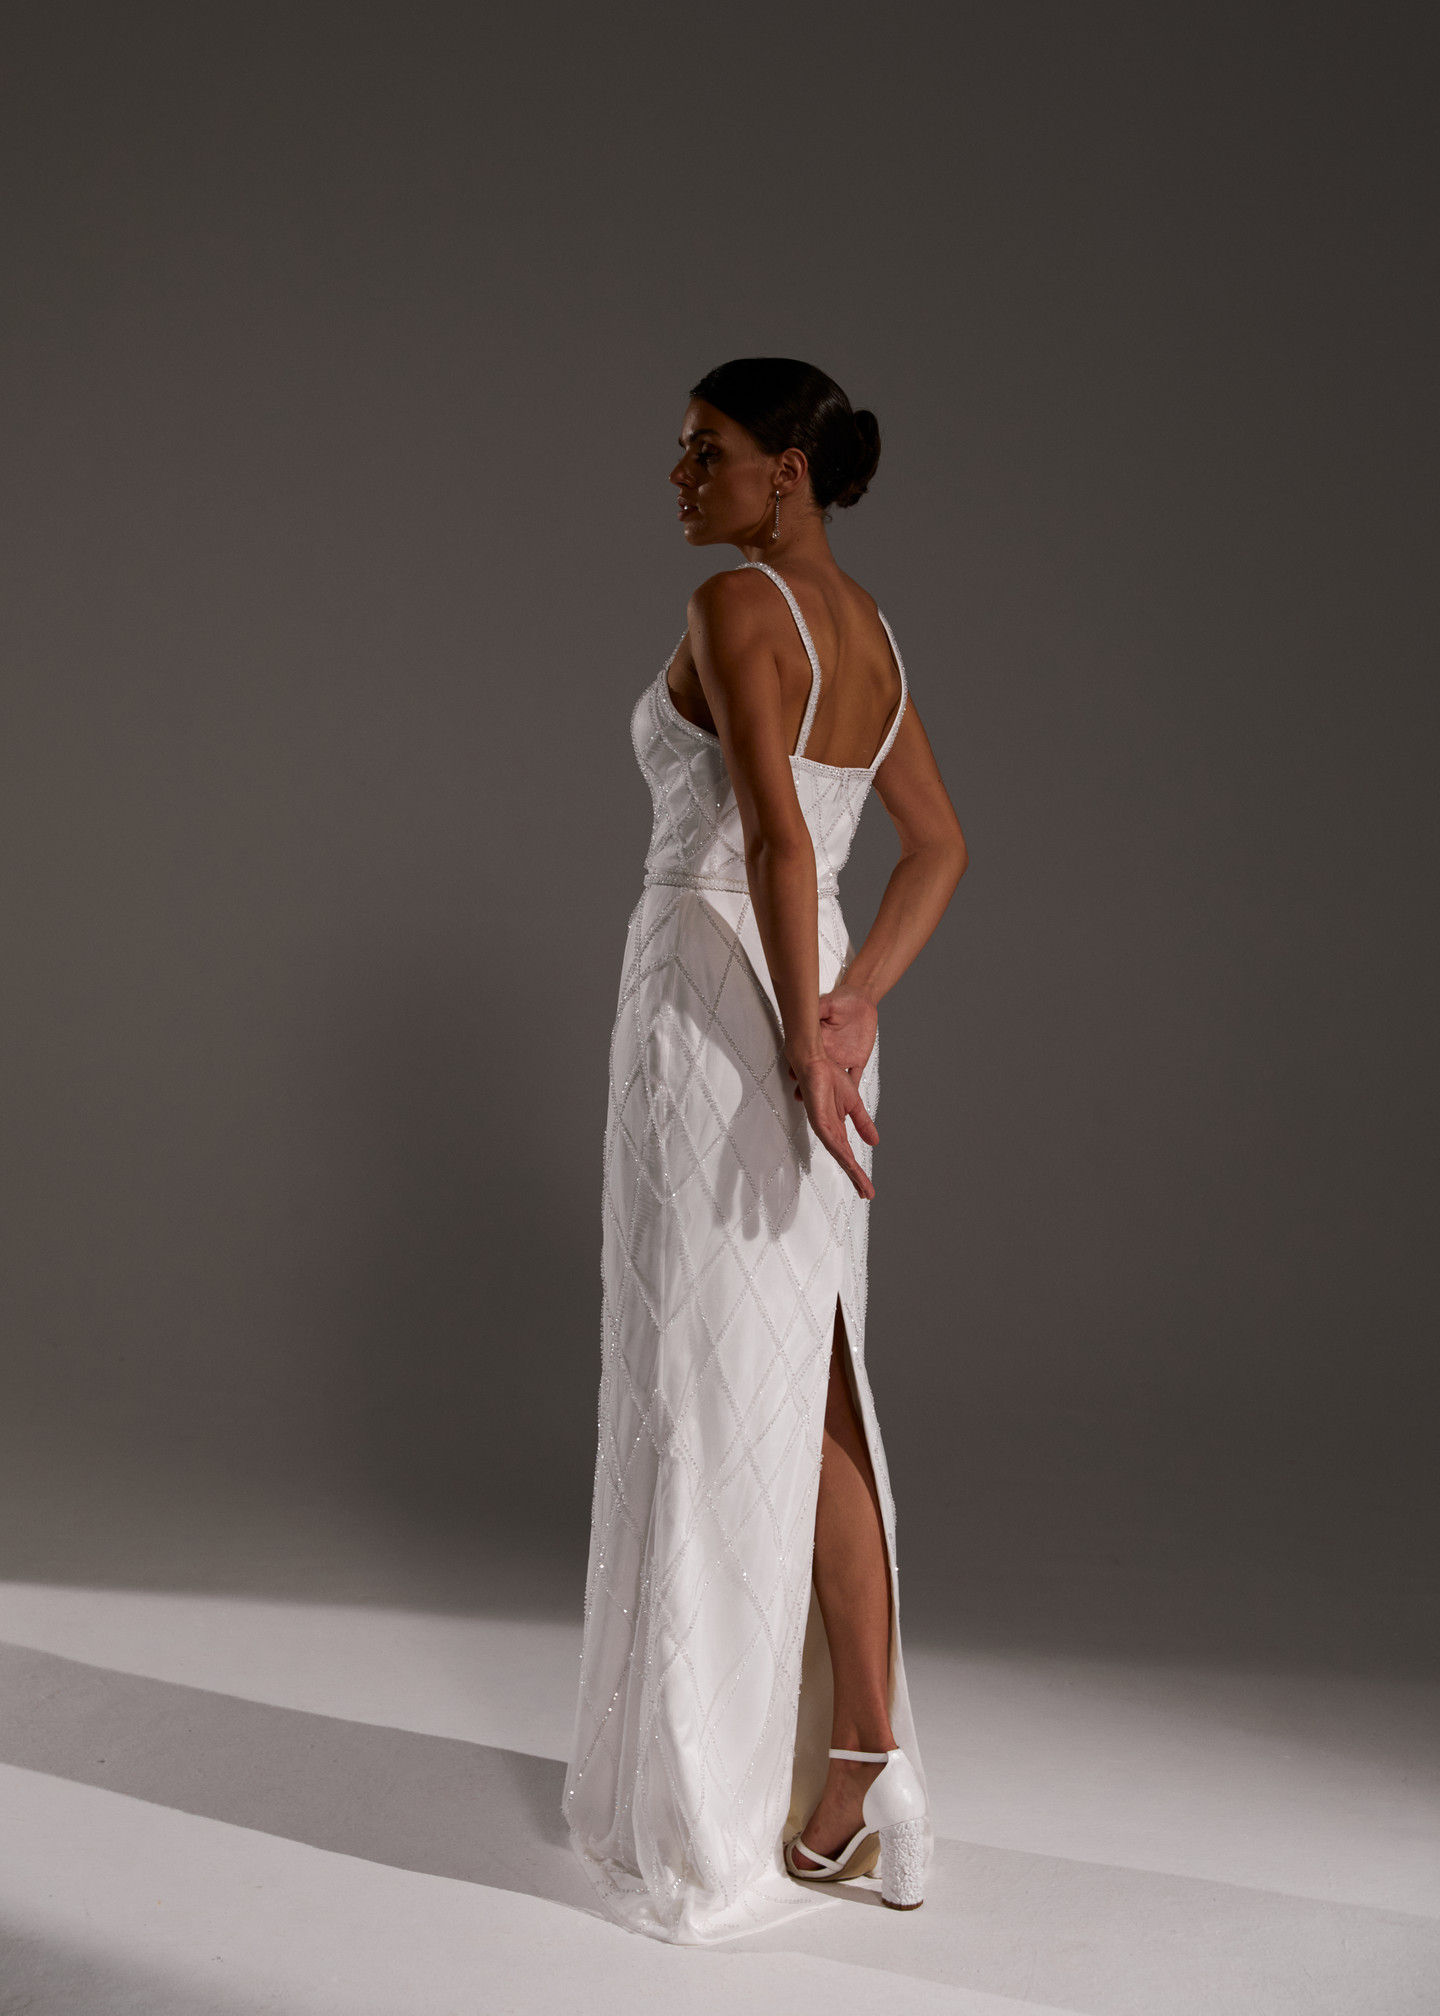 Carla dress, 2021, couture, dress, bridal, off-white, embroidery, sheath silhouette